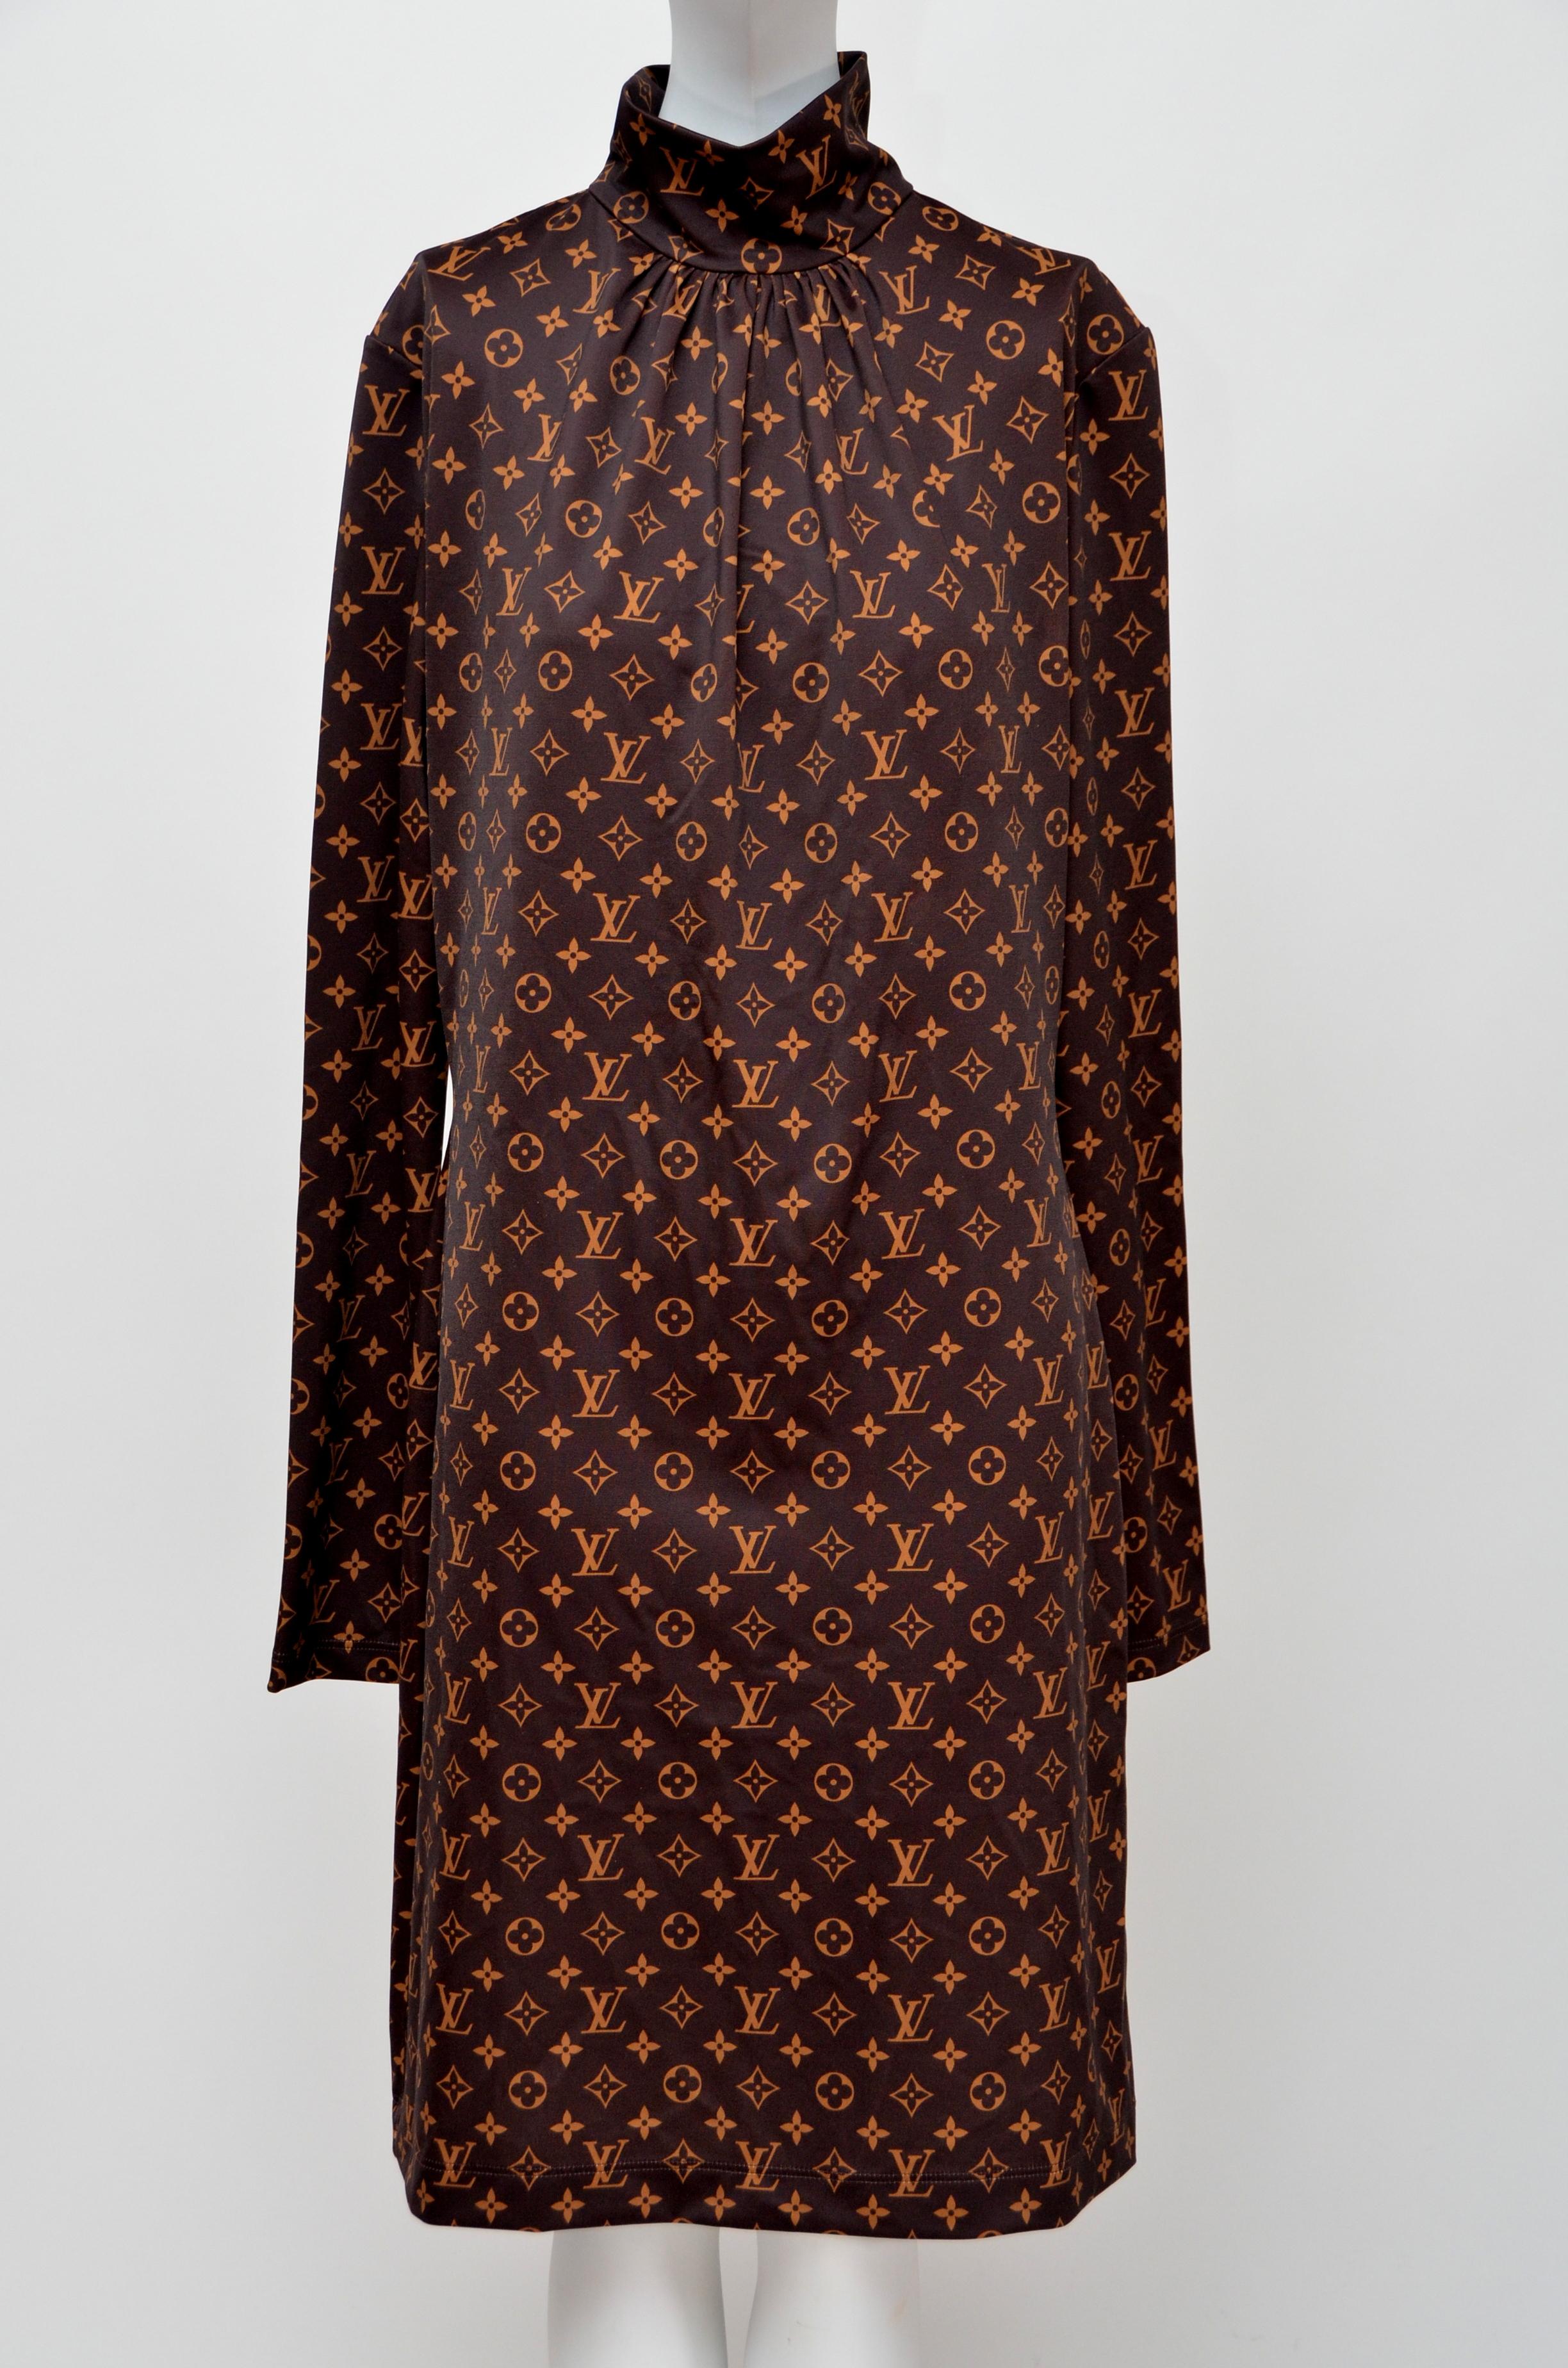 The House’s iconic Monogram motif makes a signature statement as an allover print on this sleek long-sleeved dress. The feminine look is heightened with a form-fitting silhouette and elegant gathering below the turtleneck. An exposed zipper on the